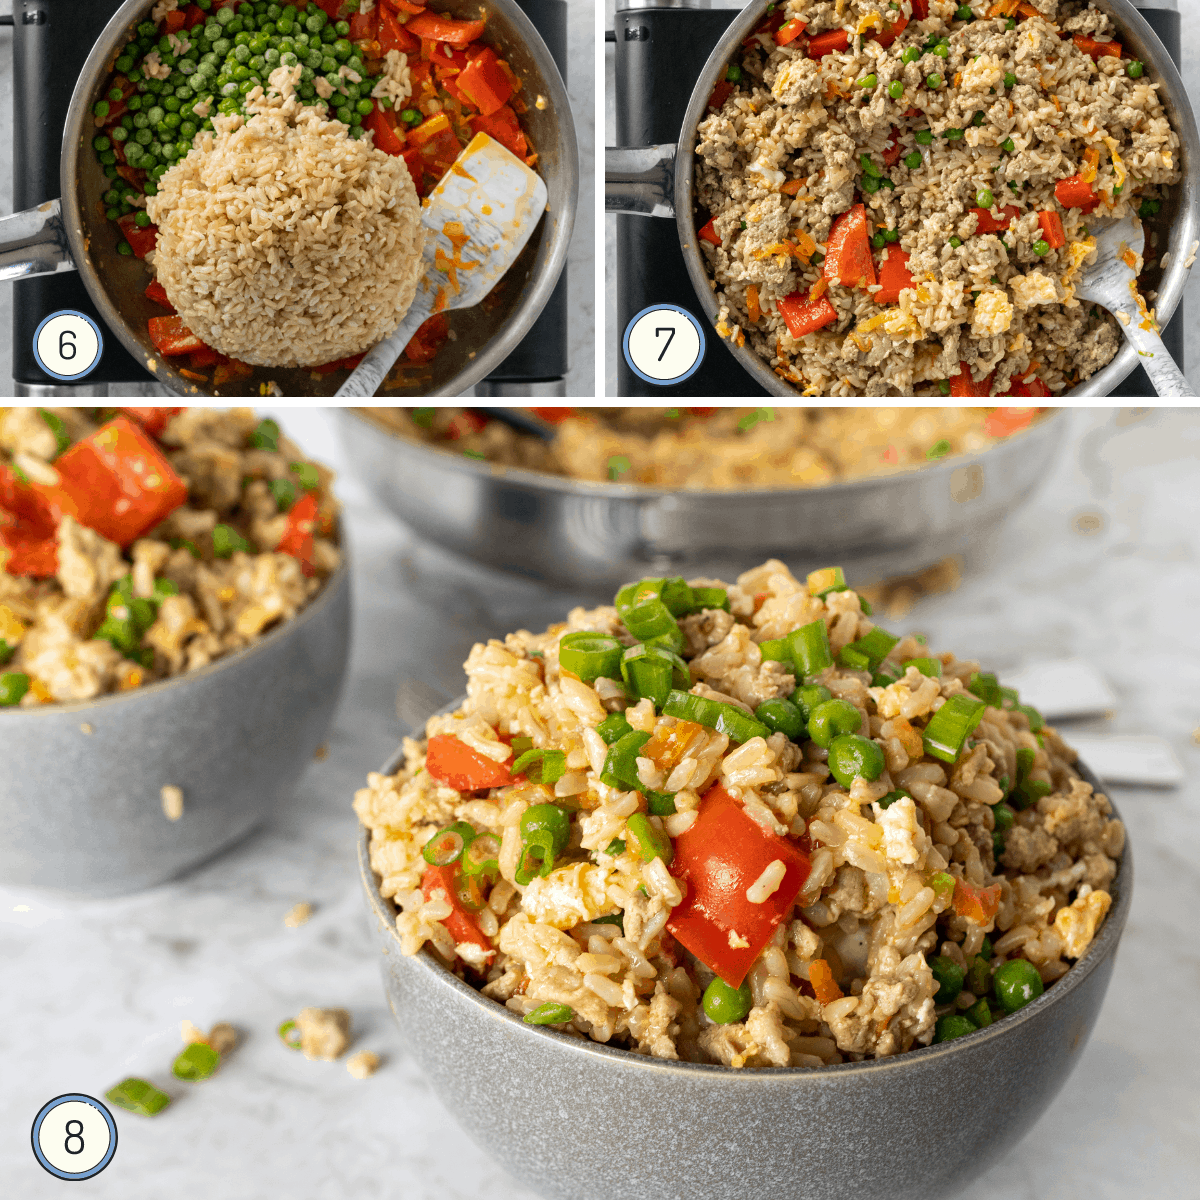 the last steps for making turkey fried rice.